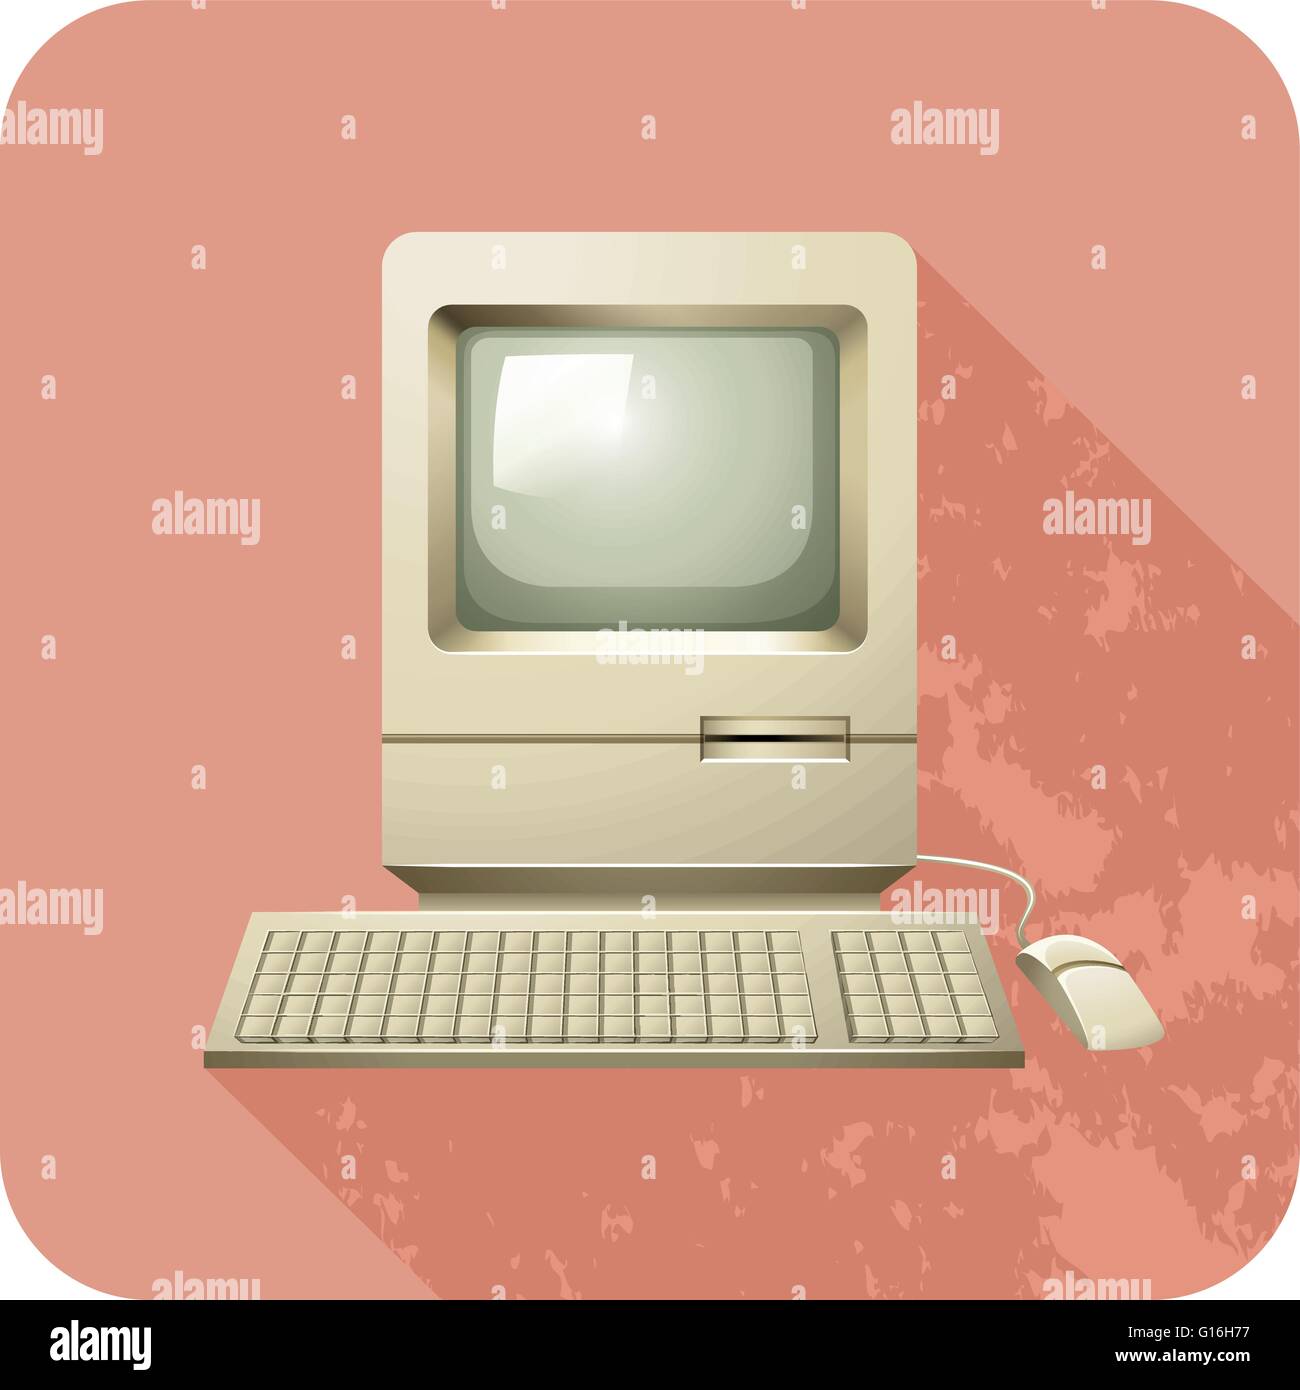 Personal computer with keyboard and mouse Stock Vector